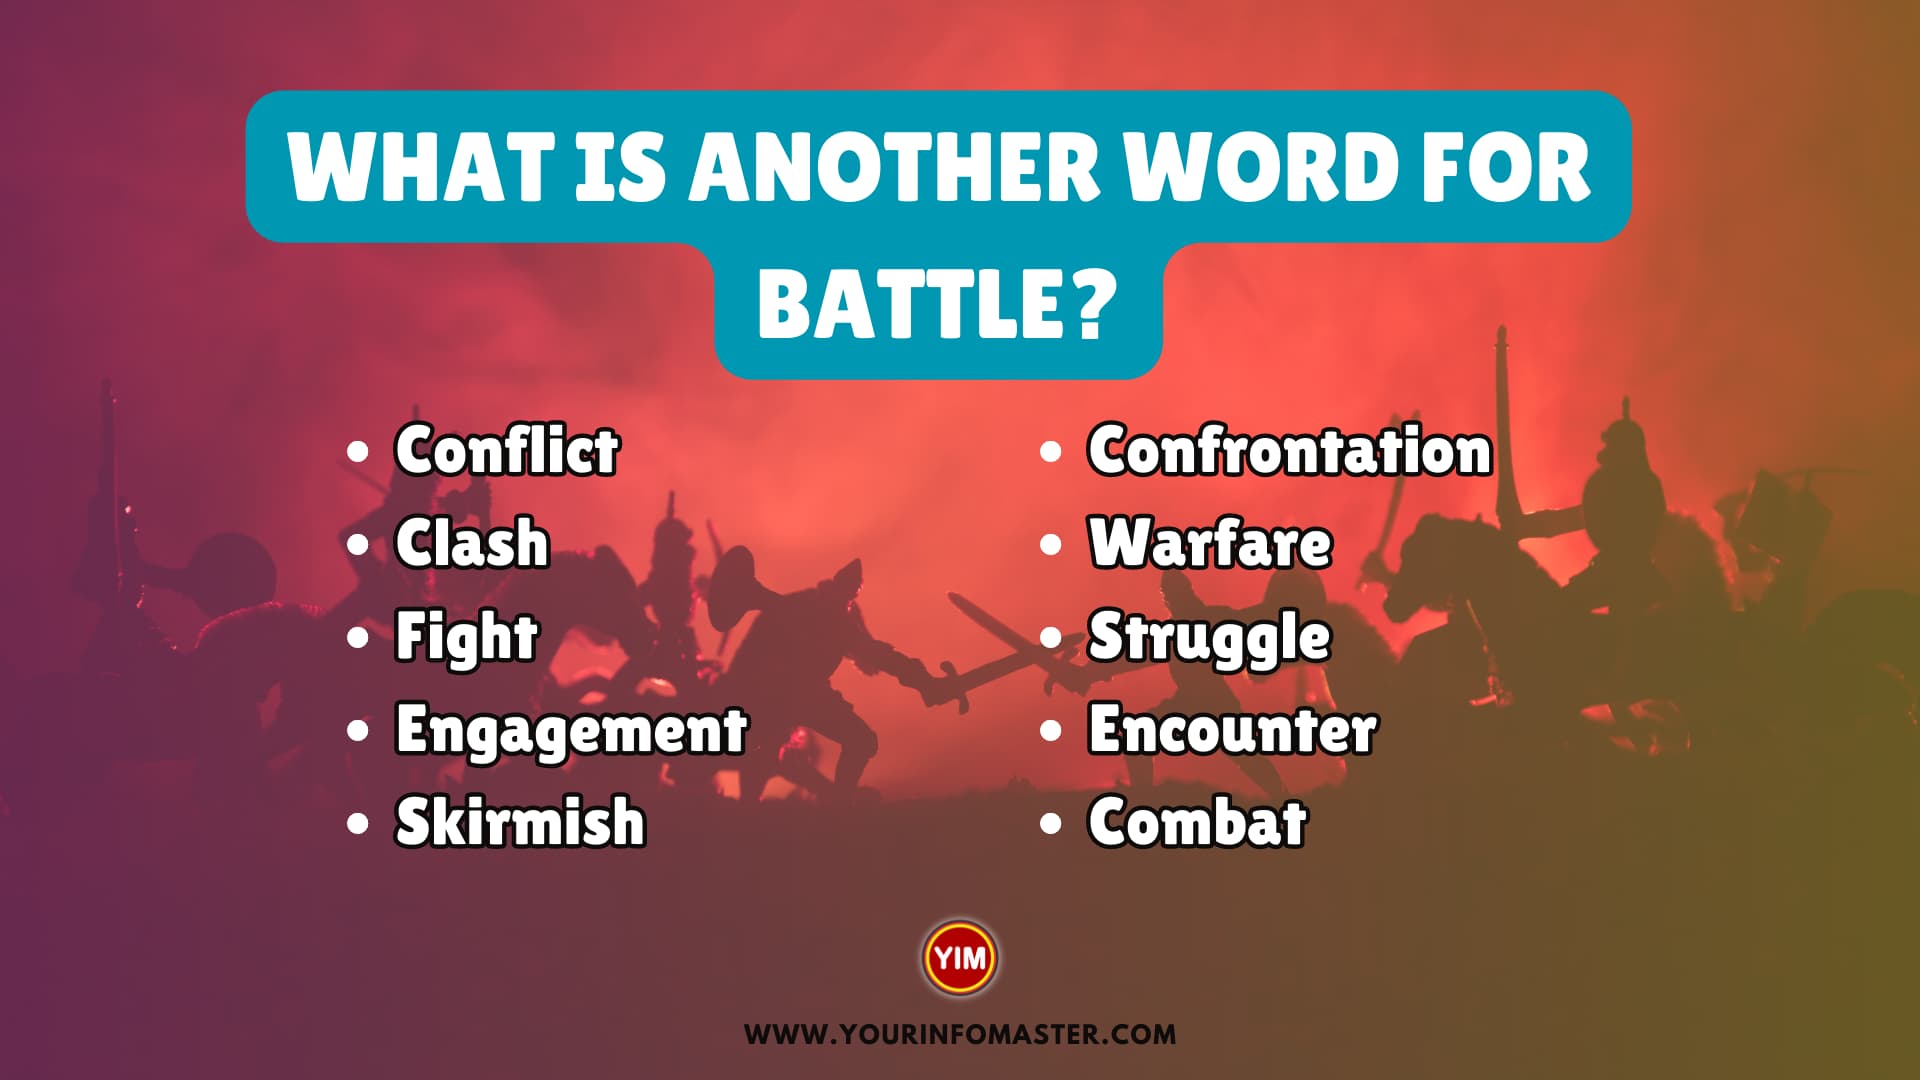 What is another word for Battle